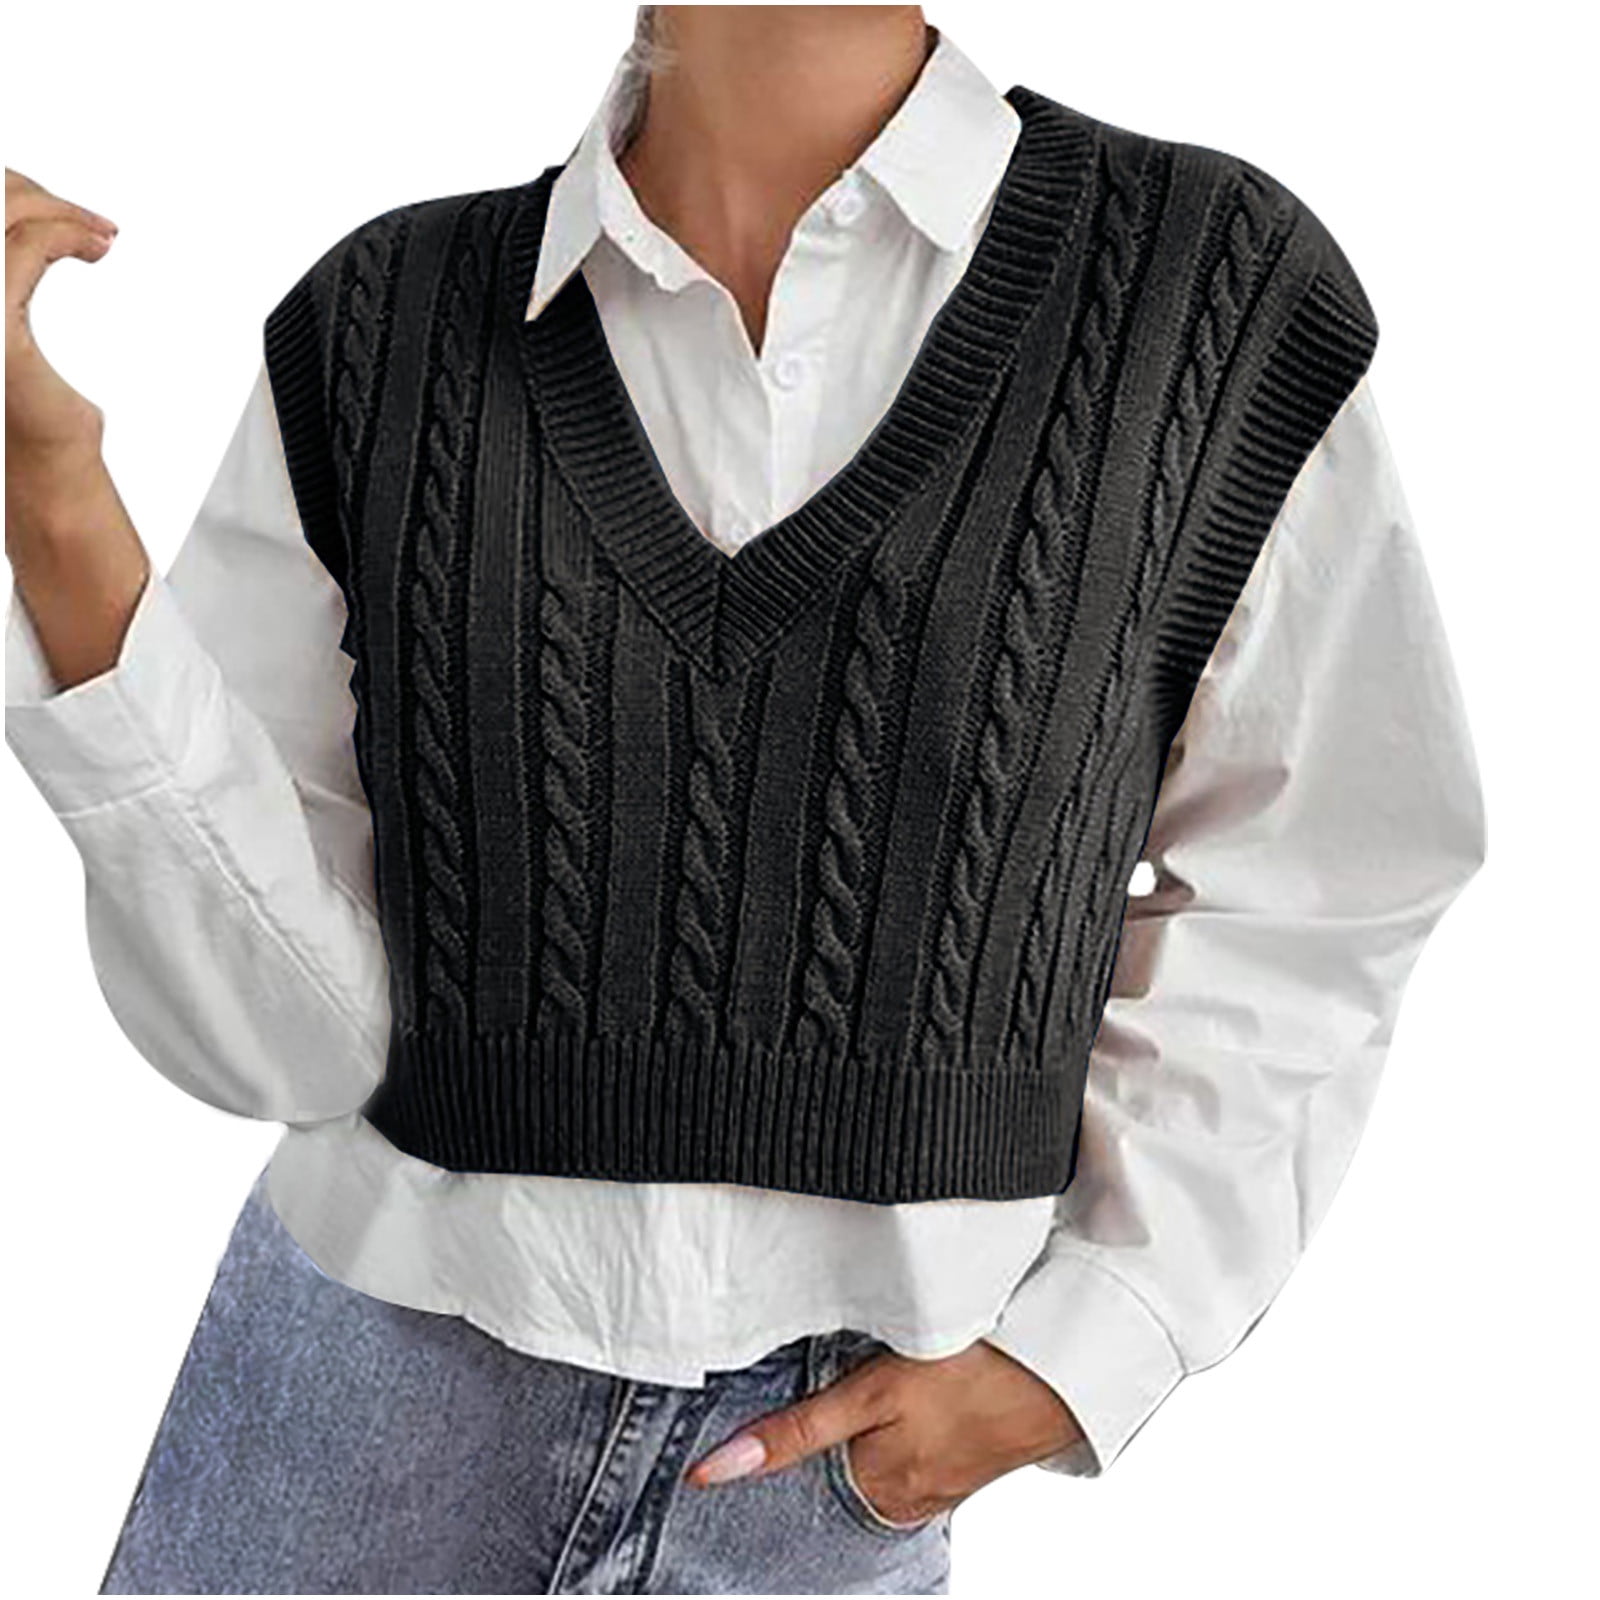 23 Sweater Vests & Knitted Vests to Shop In 2023